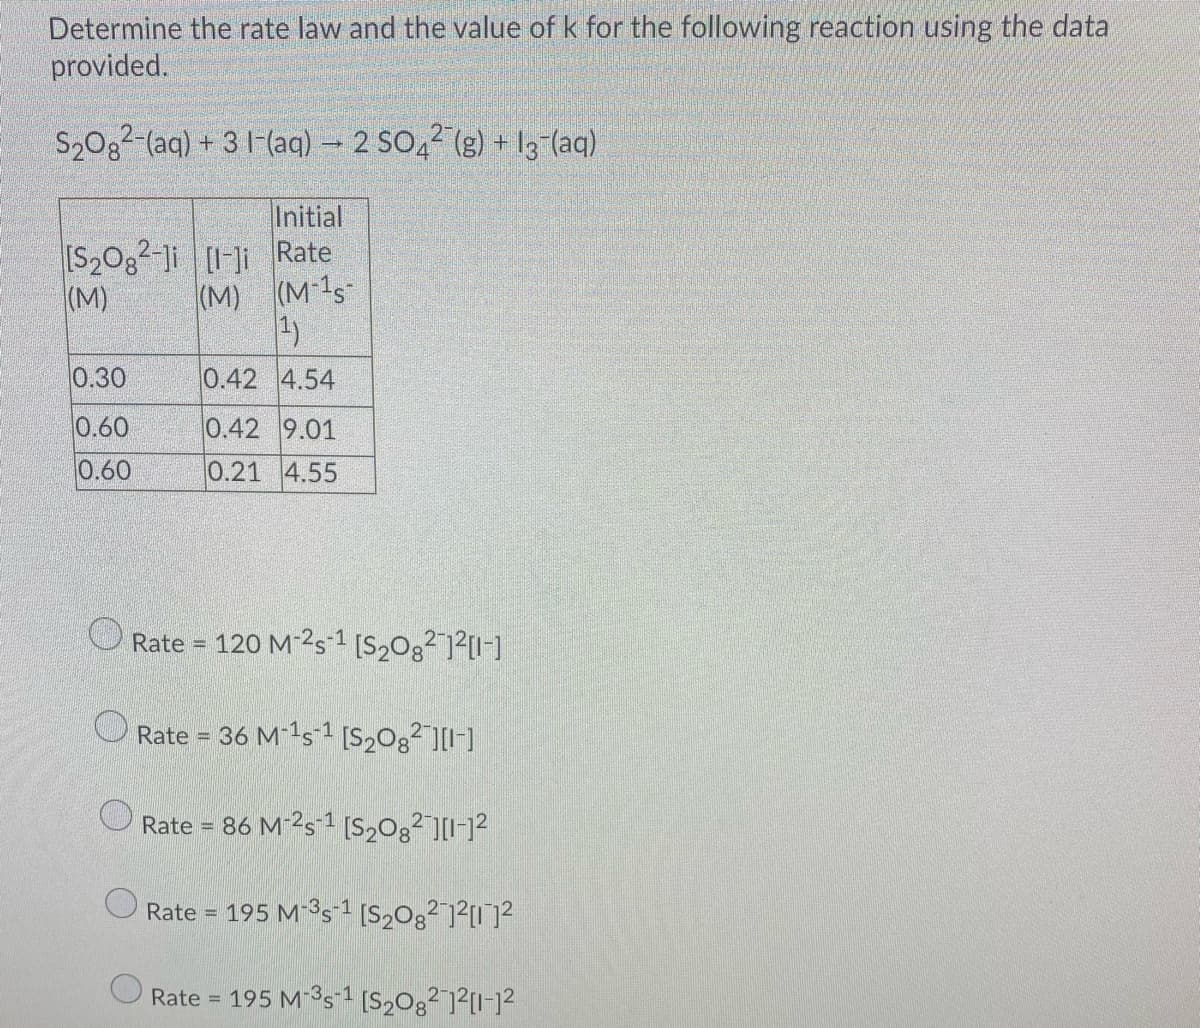 Determine the rate law and the value of k for the following reaction using the data
provided.
S20g2-(aq) + 31-(aq) - 2 SO,2 (g) + 13-(aq)
Initial
[S20g2-Ji [I-]i Rate
(M 1s
(M)
(M)
1)
0.30
0.42 4.54
0.60
0.42 9.01
0.60
0.21 4.55
Rate = 120 M-2s 1 [S2Og²]²[I-]
Rate = 36 M 1s1 [S20g²"][I-]
Rate = 86 M-2s-1 [S,0g²][I-12
%3D
Rate = 195 M s1 [S,0g²]²[I]?
%3!
Rate = 195 M-3s 1 [S2Og? ]?[I-]2
